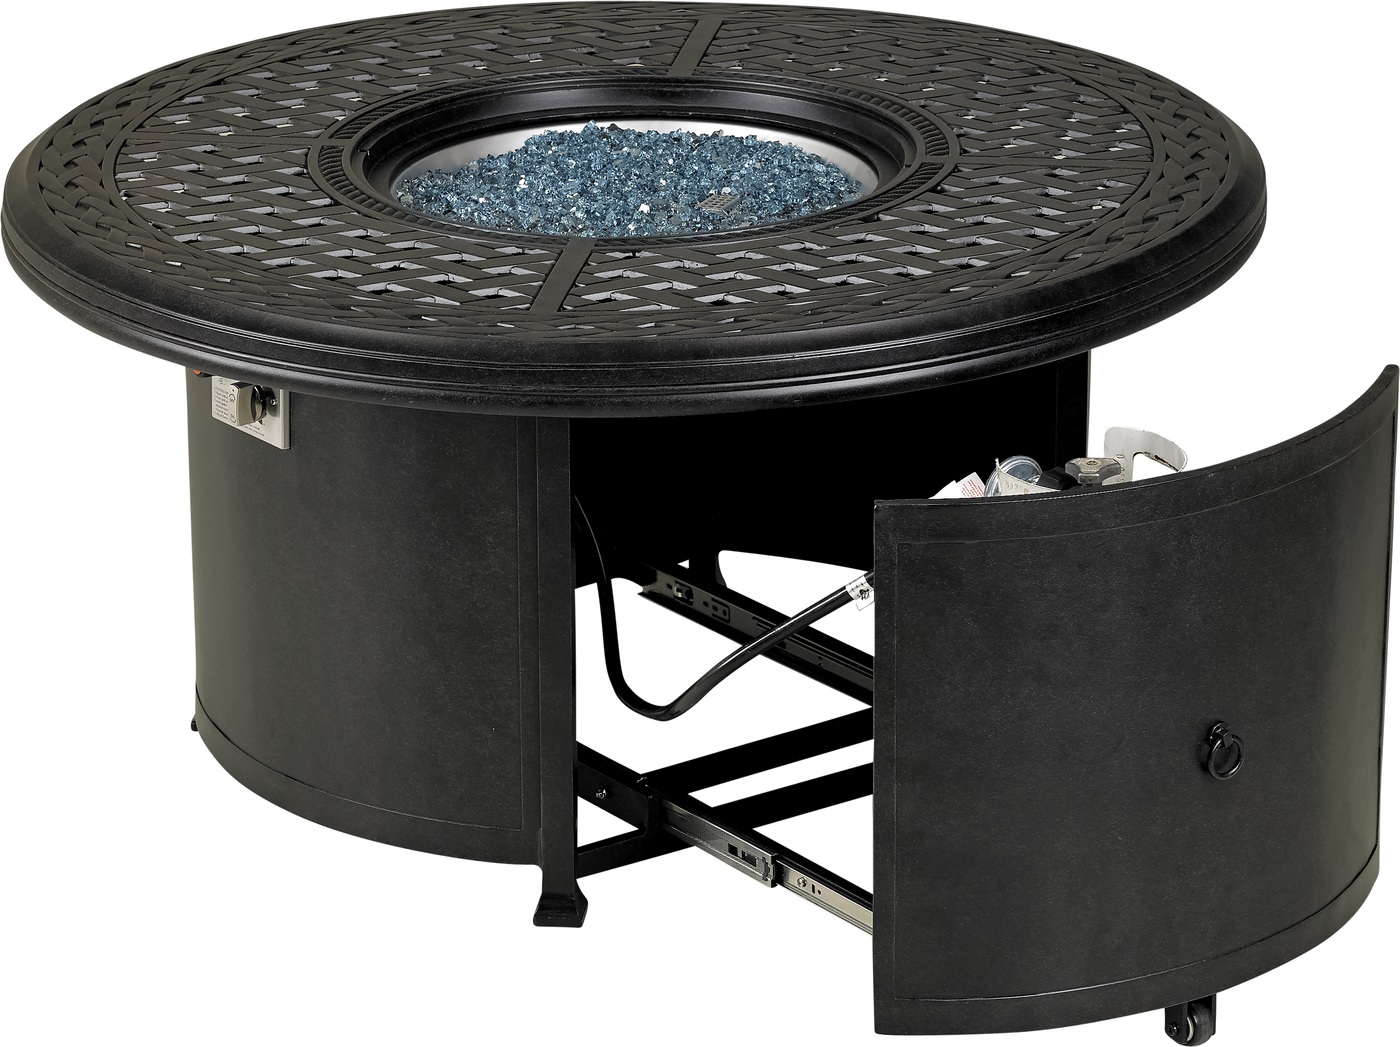 48" Windsor Series Round Fire Table w/ Built-In Burner Accessory